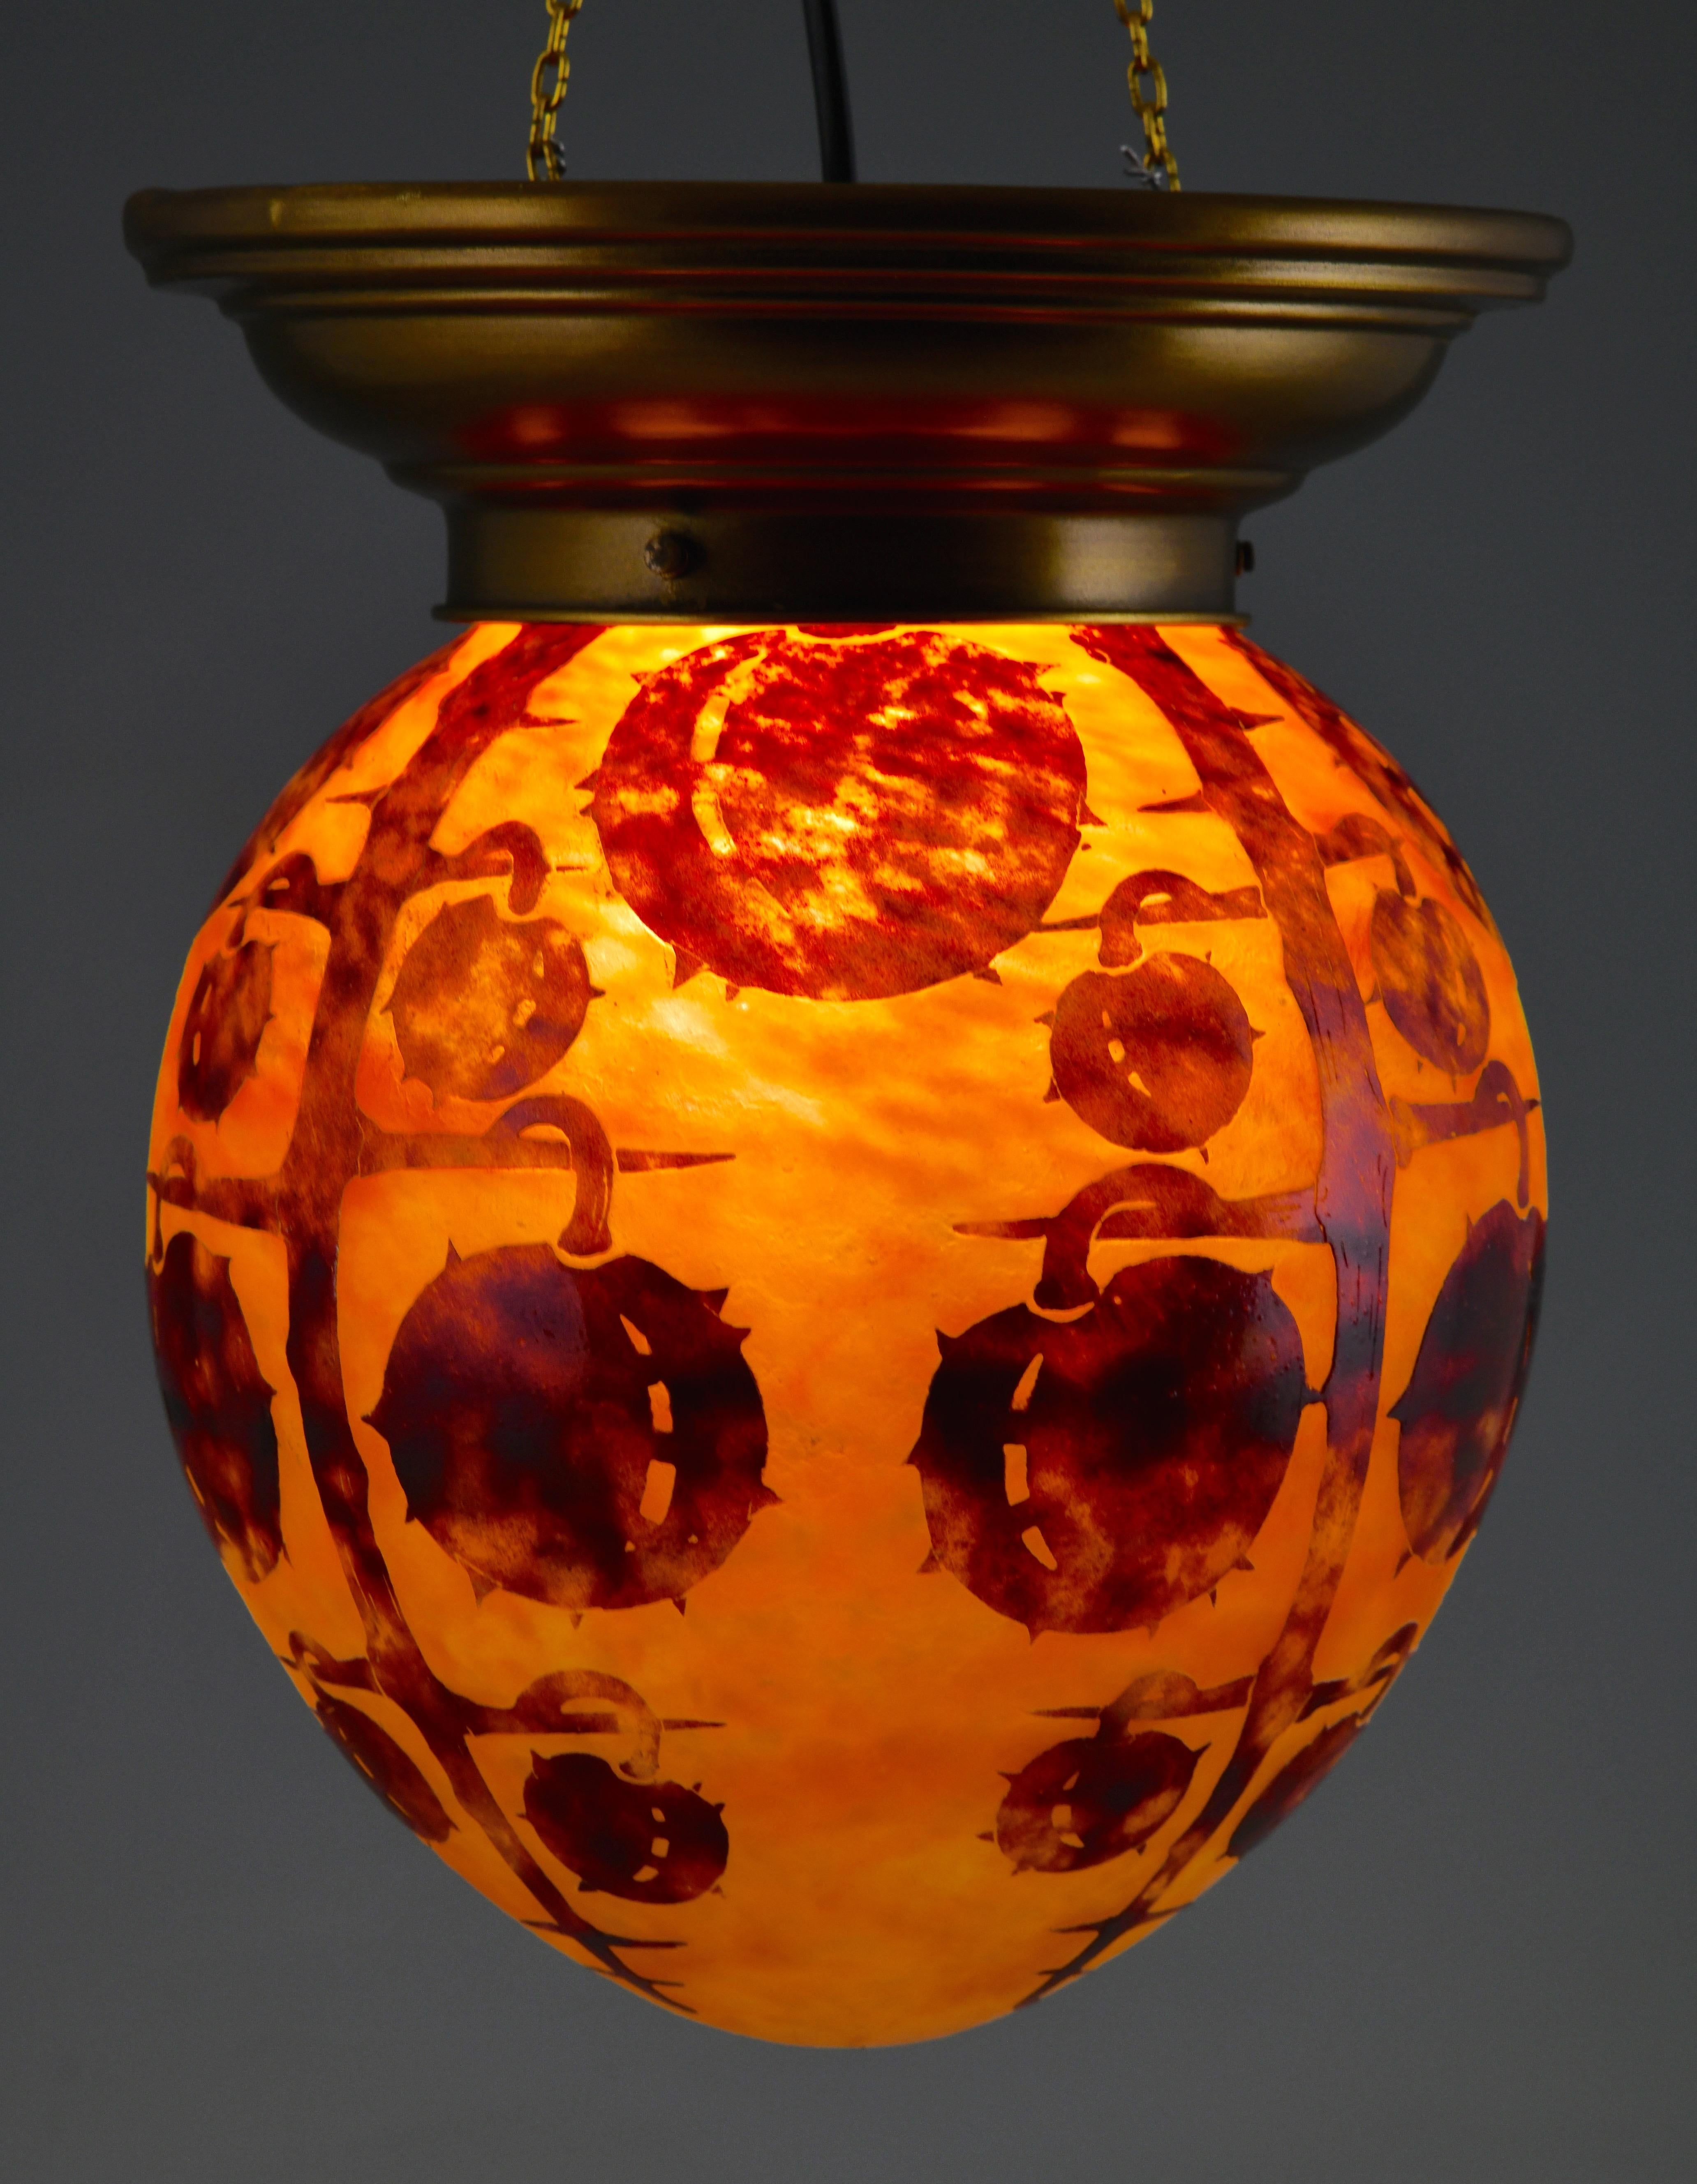 Marrons, Art Deco Cameo glass ceiling light by Charles Schneider for Le Verre Français.
France 1922-1925. 
Colors: Orange & brown cameo glass with a copper frame.

The same design is illustrated in 
Schneider Maître verrier, Gerard Betrand &
Charles